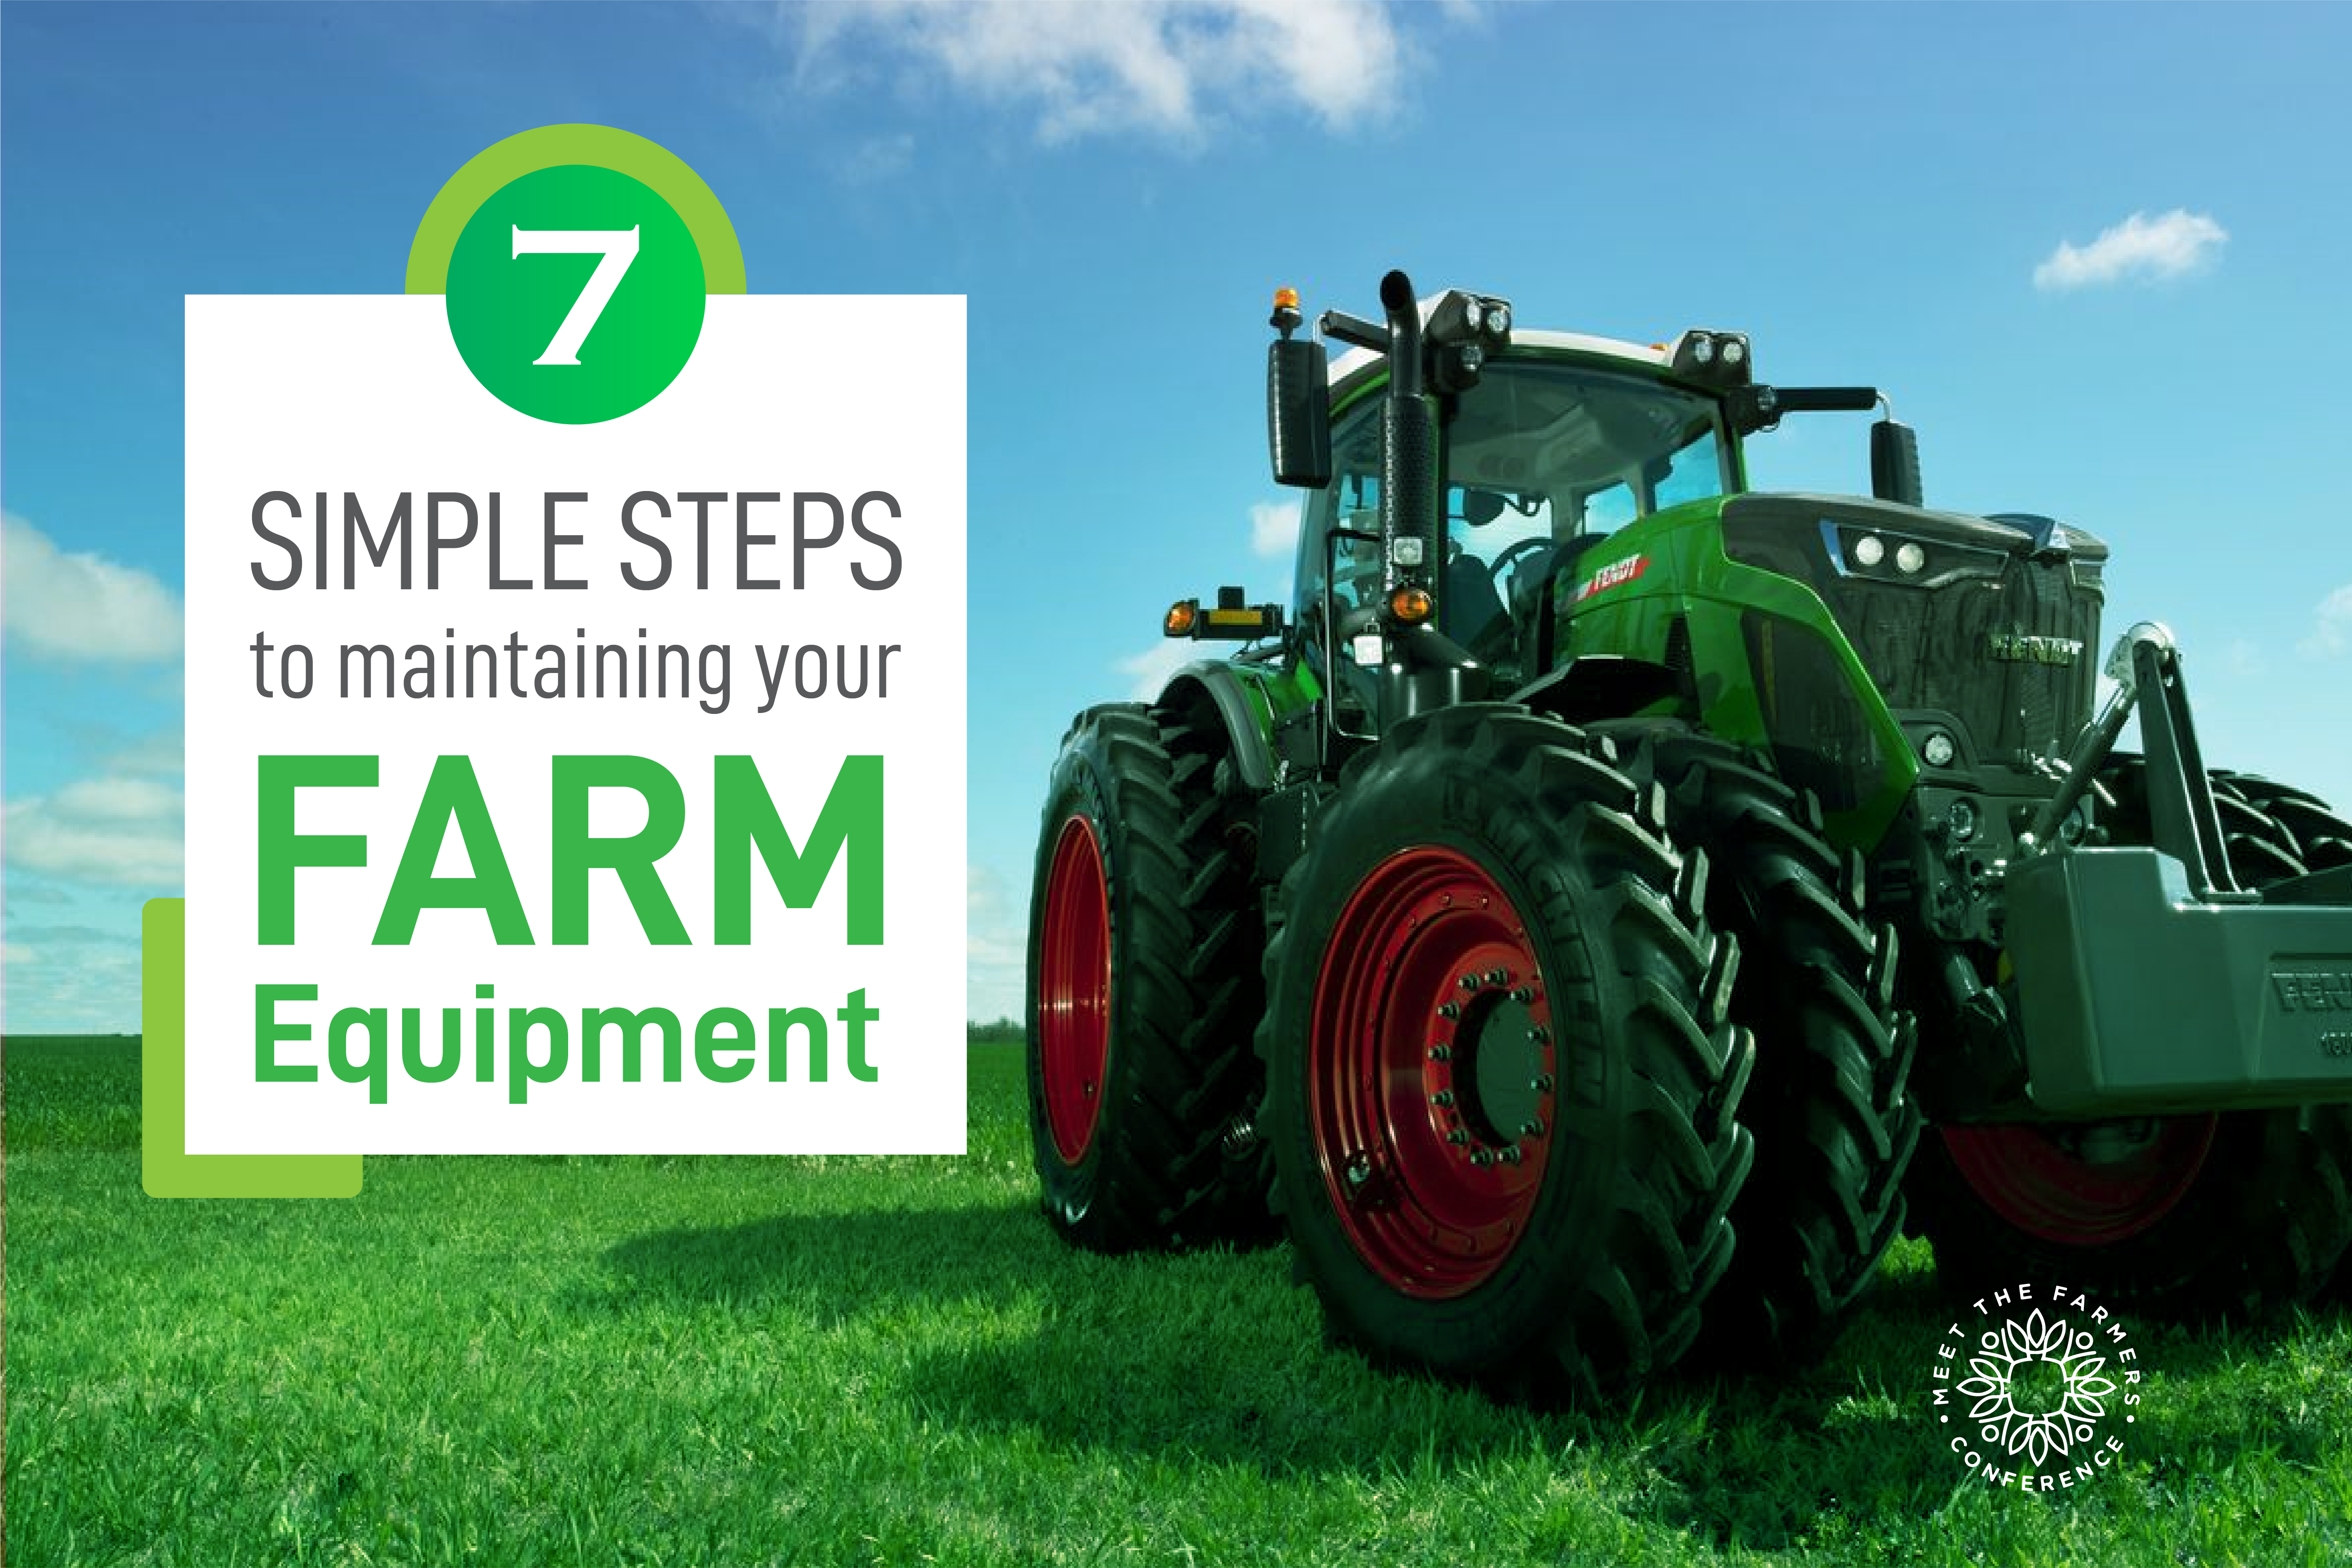 7 Simple Tips to Maintain Your Farm Equipment